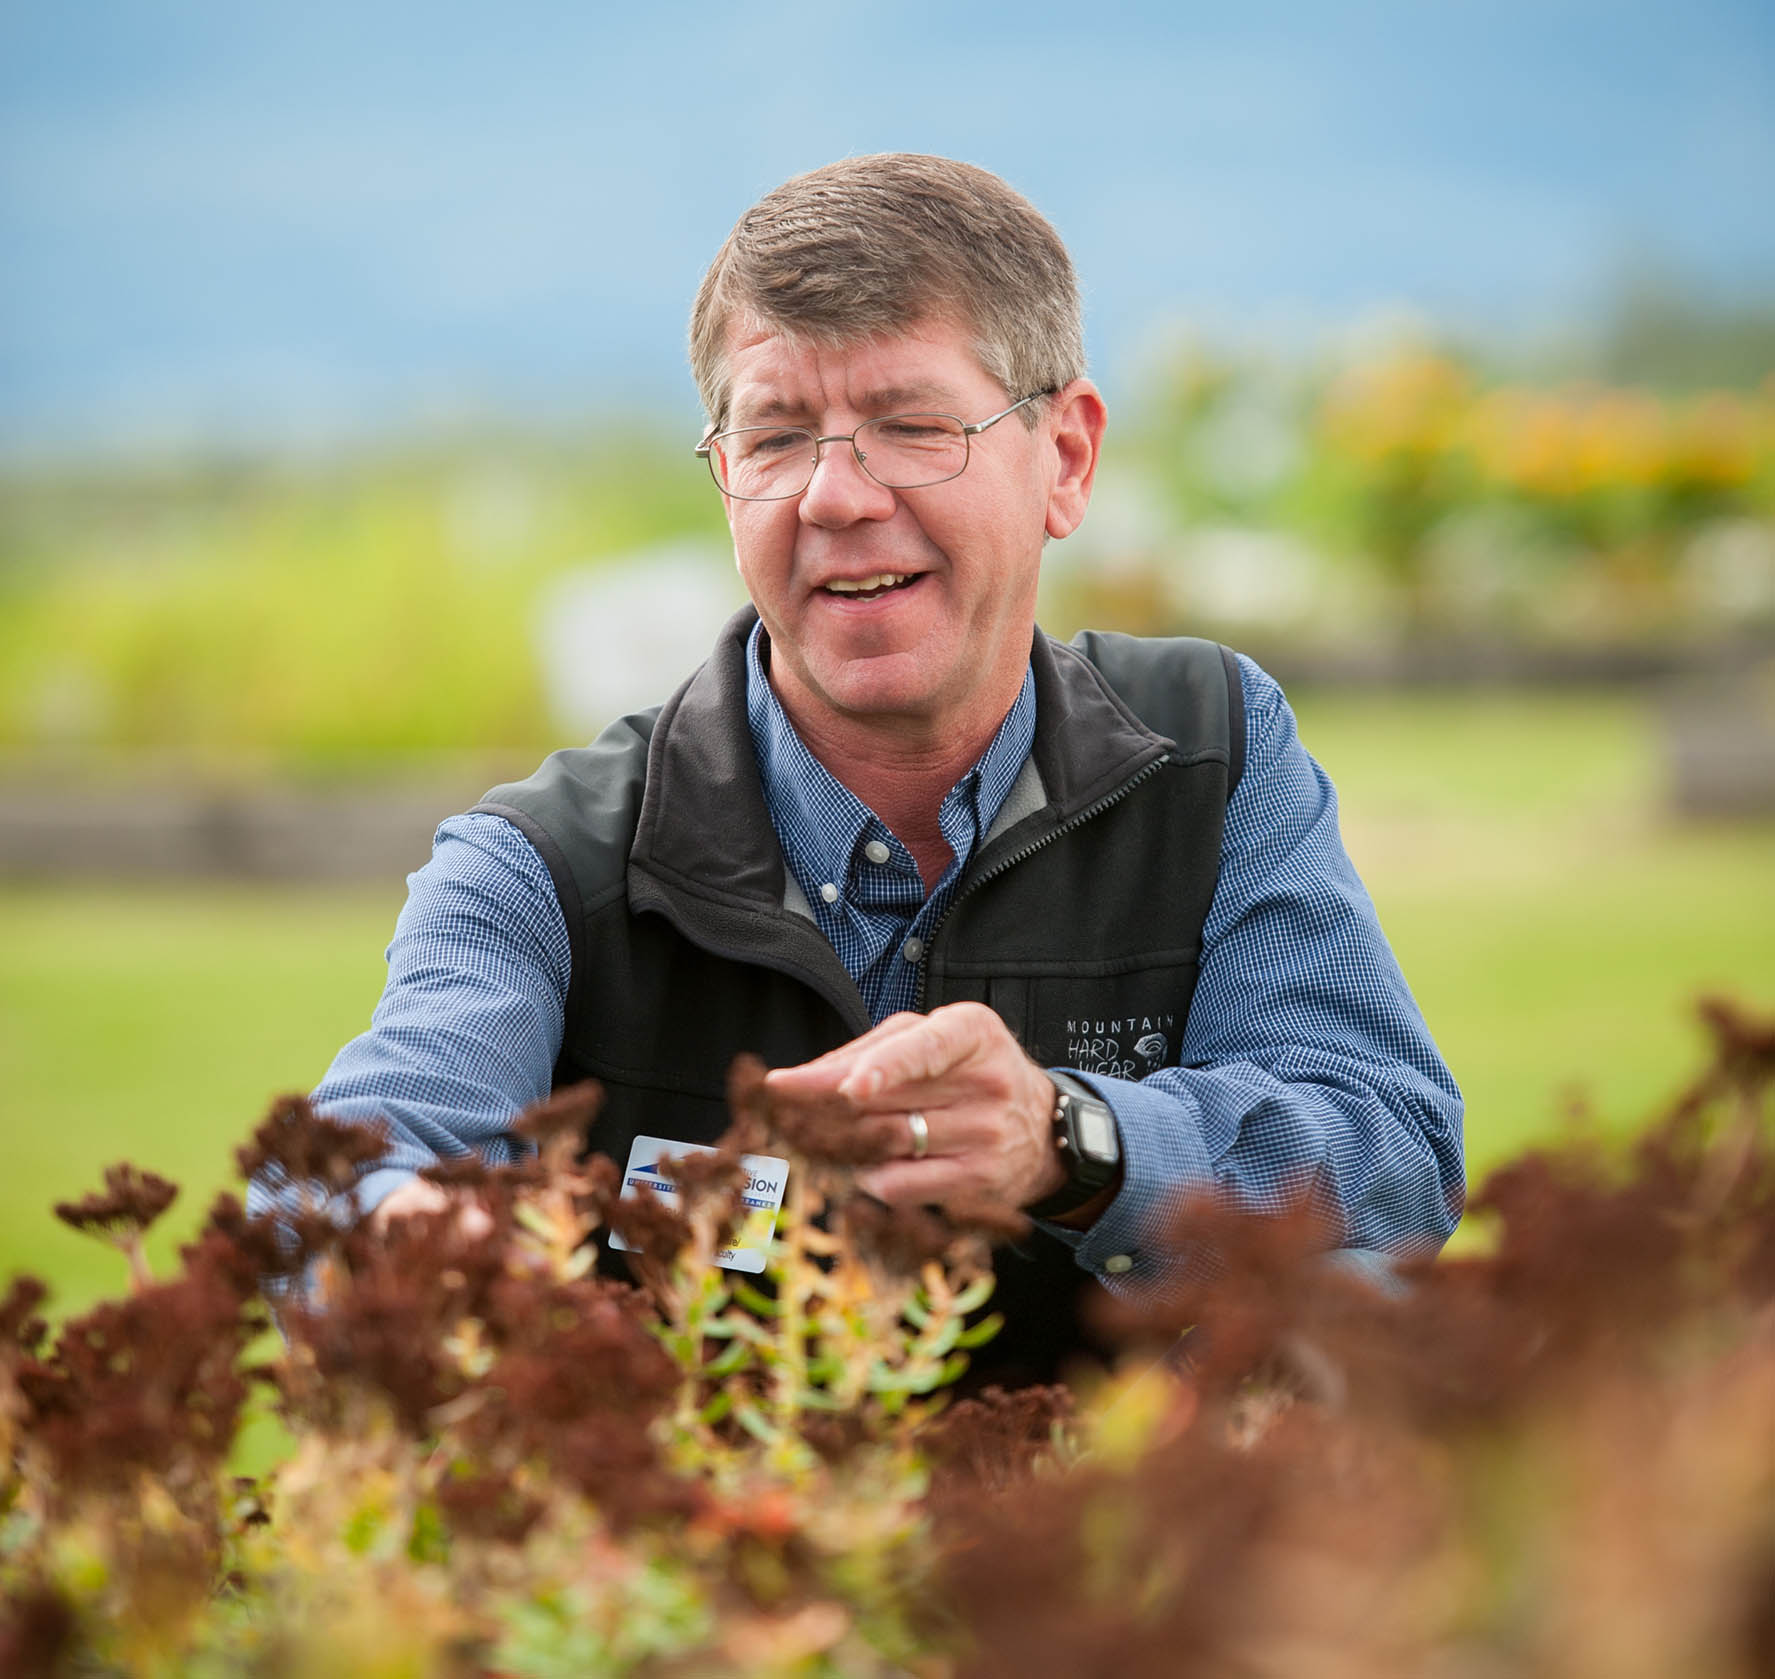 A man with a blue shirt and vest looks at a rhodiola plant